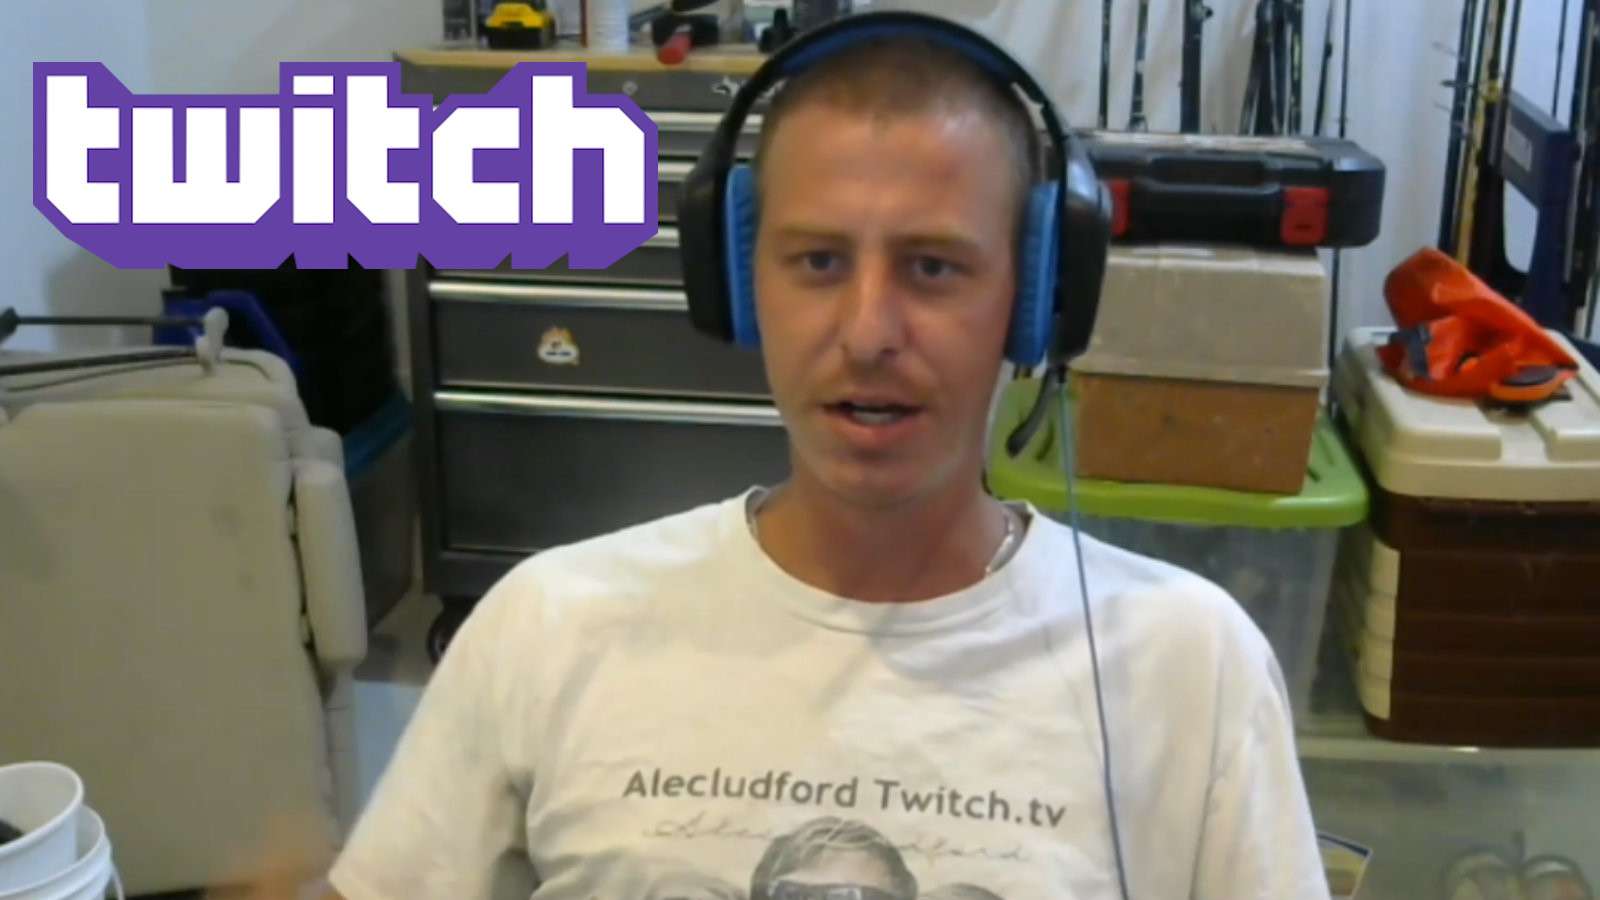 Alecludford explains how Twitch remove emotes of his late fiance.